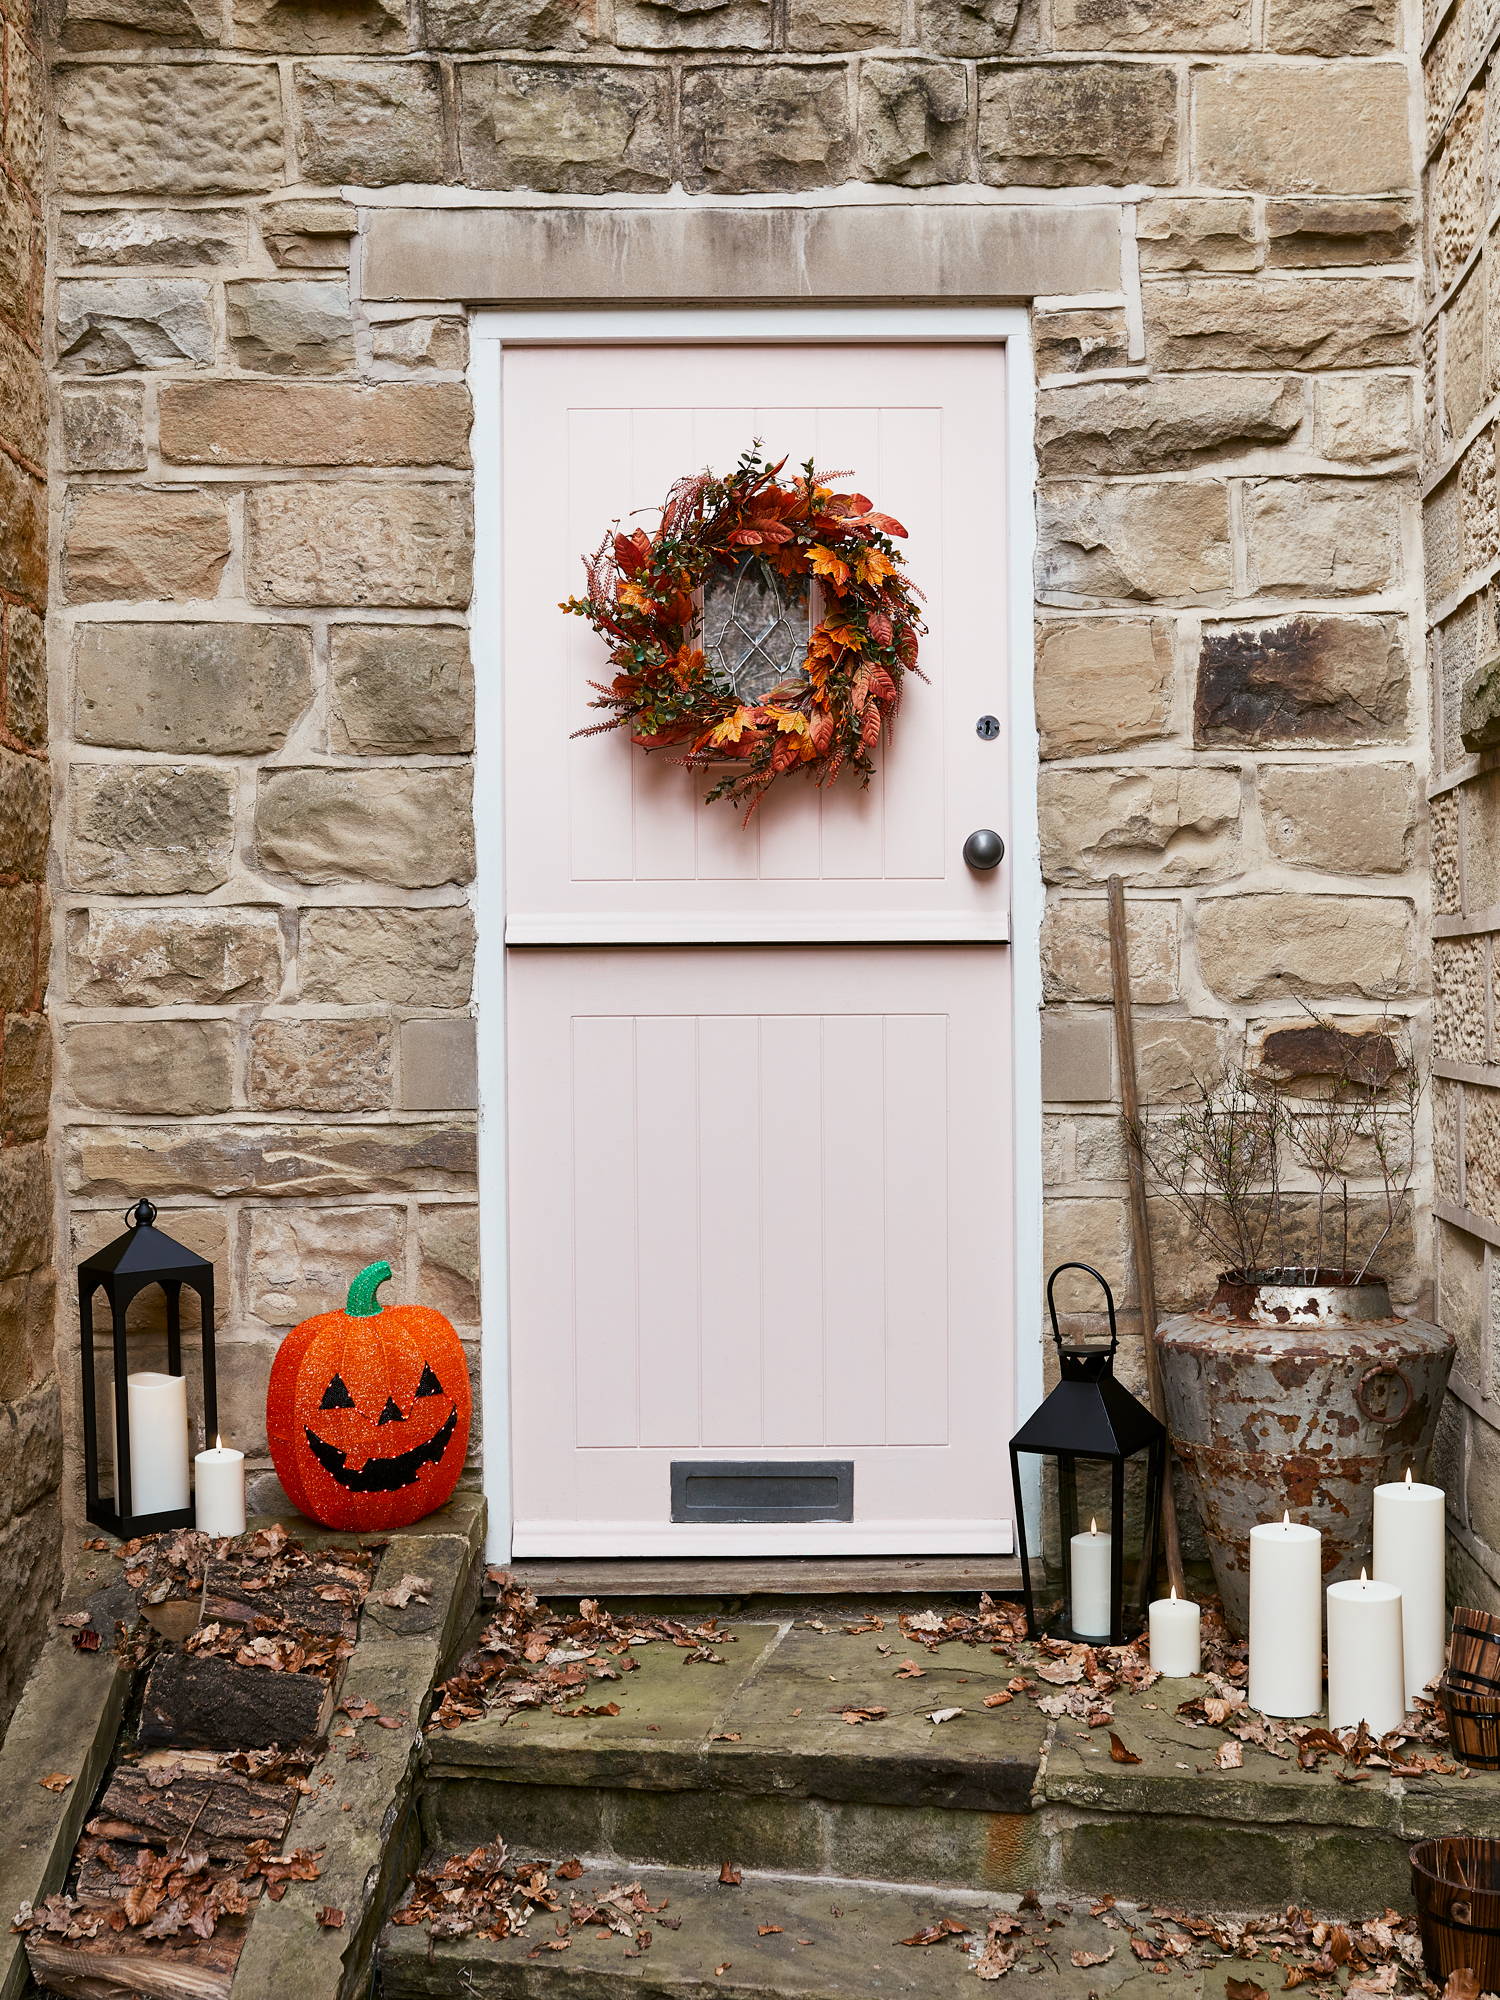 Outside porch decorated with an Autumn wreath, lanterns, candles and a pumpkin.